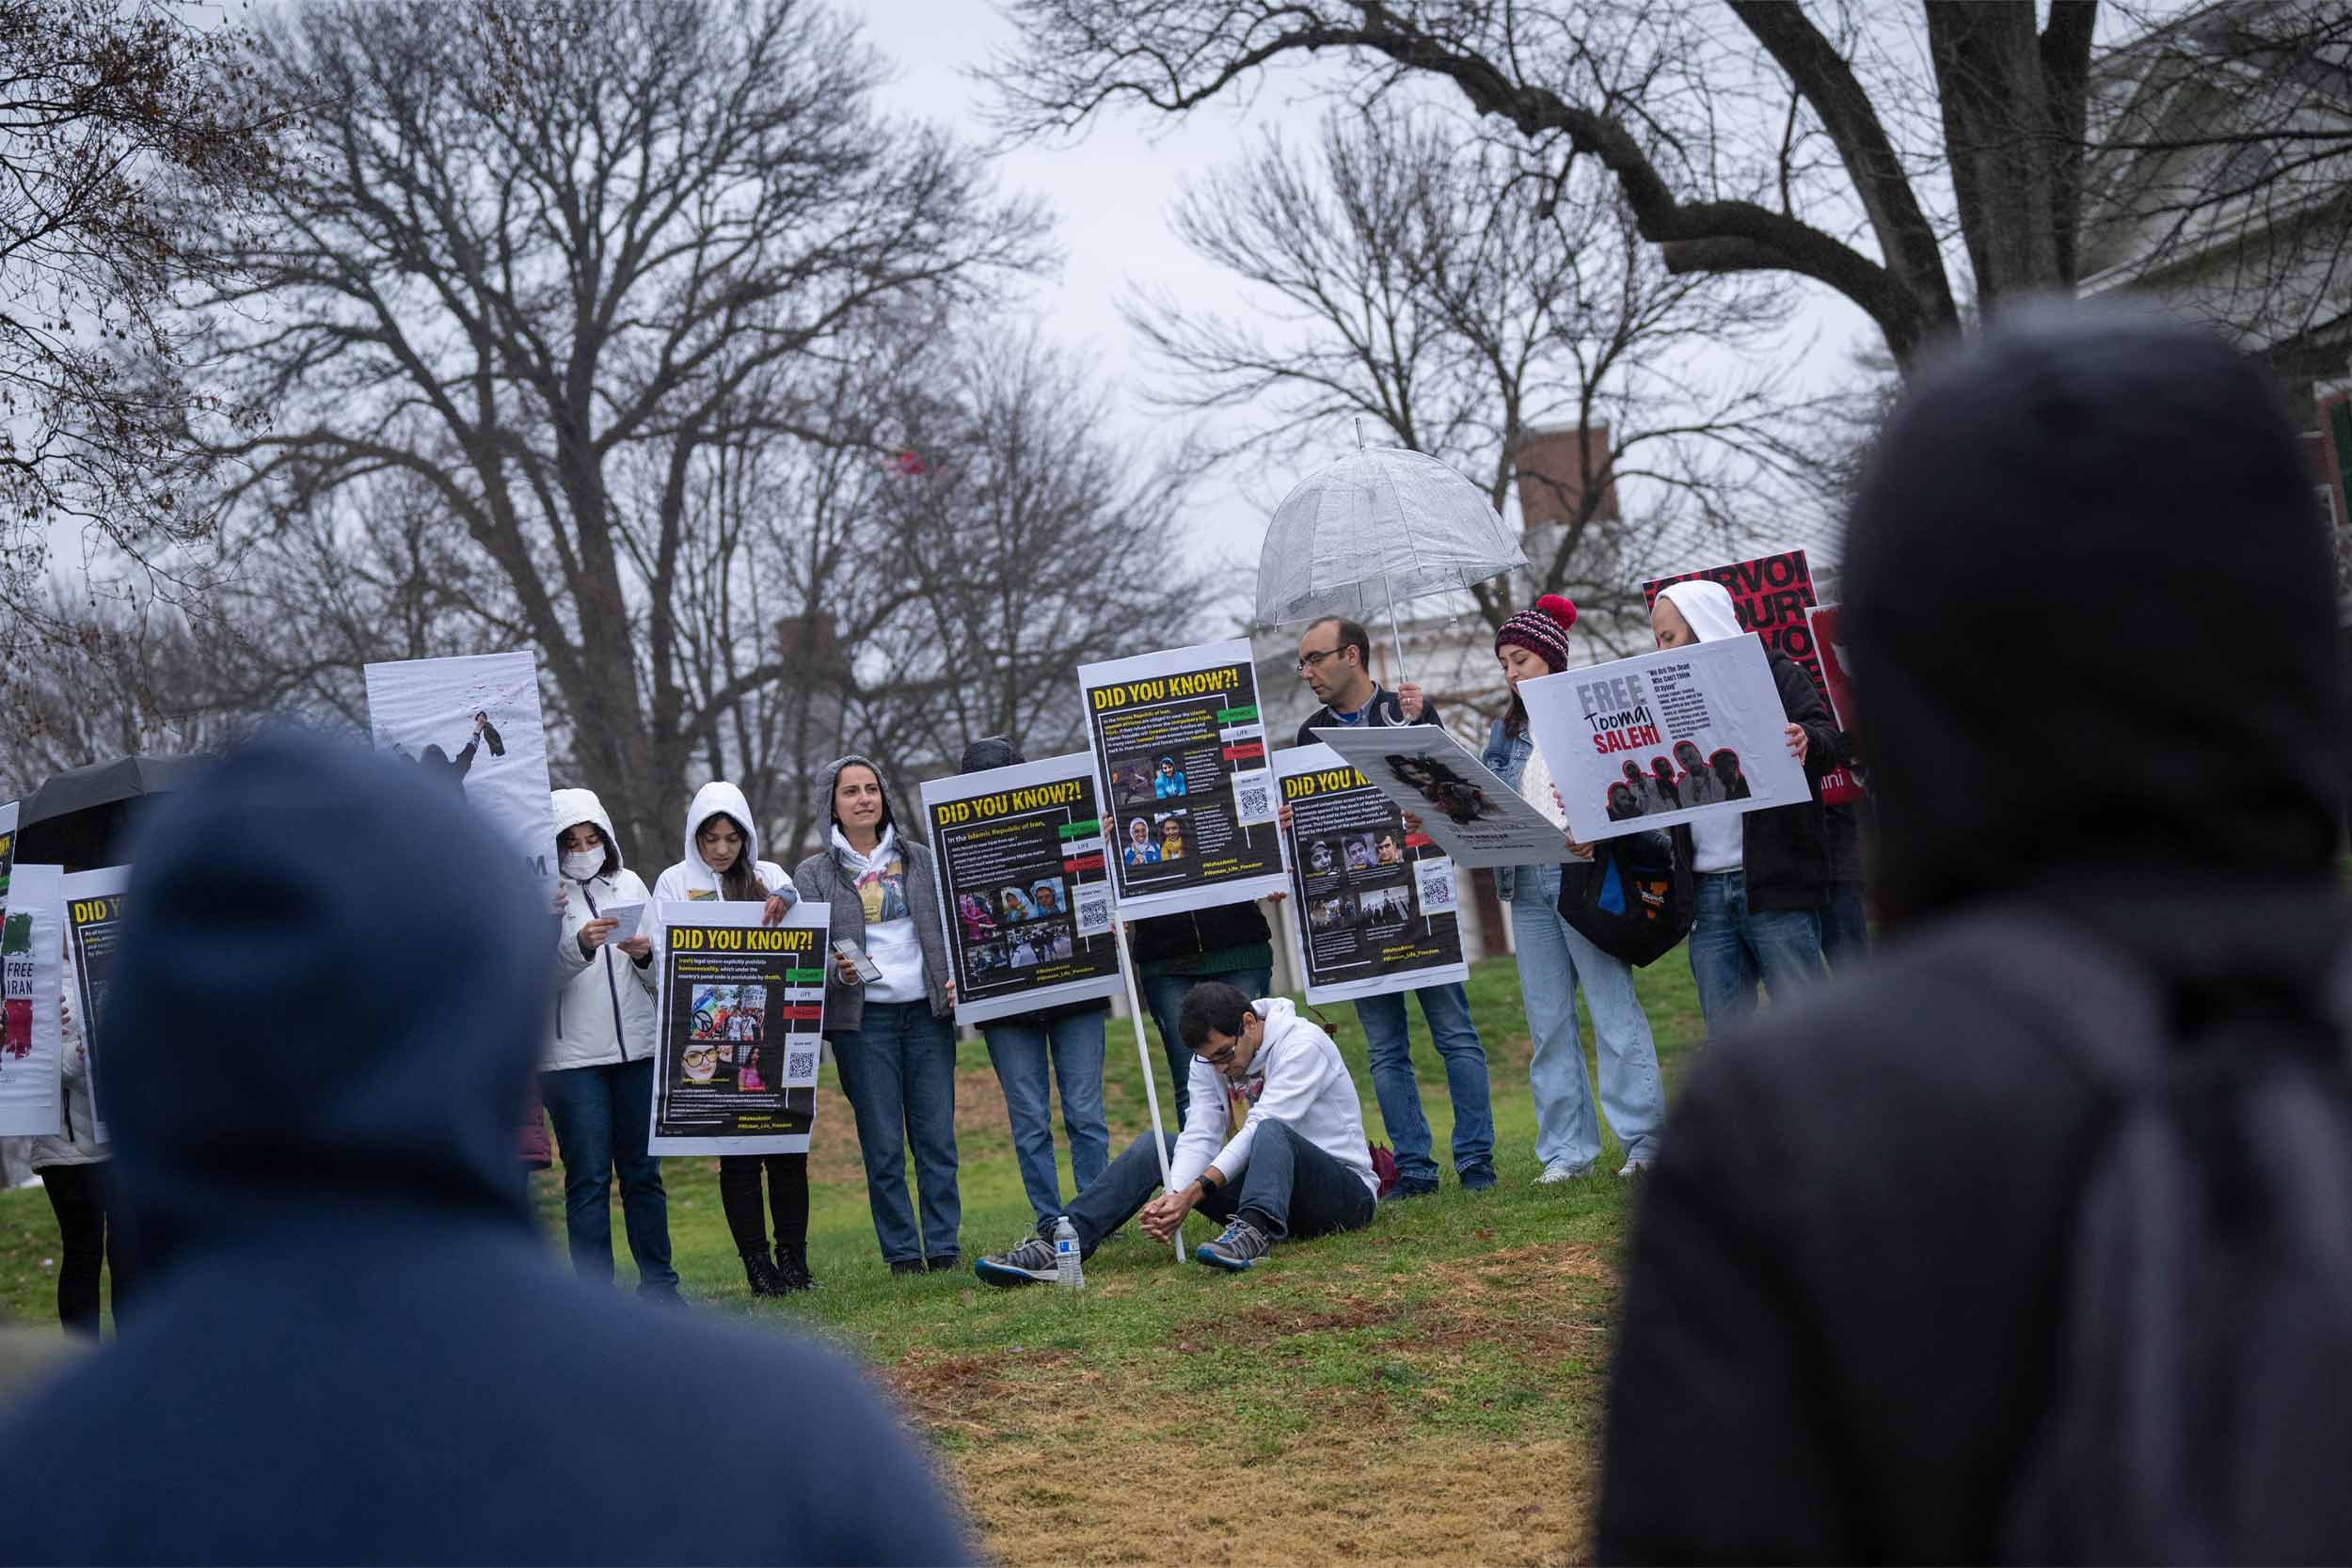 Students protesting holding various signs on the lawn